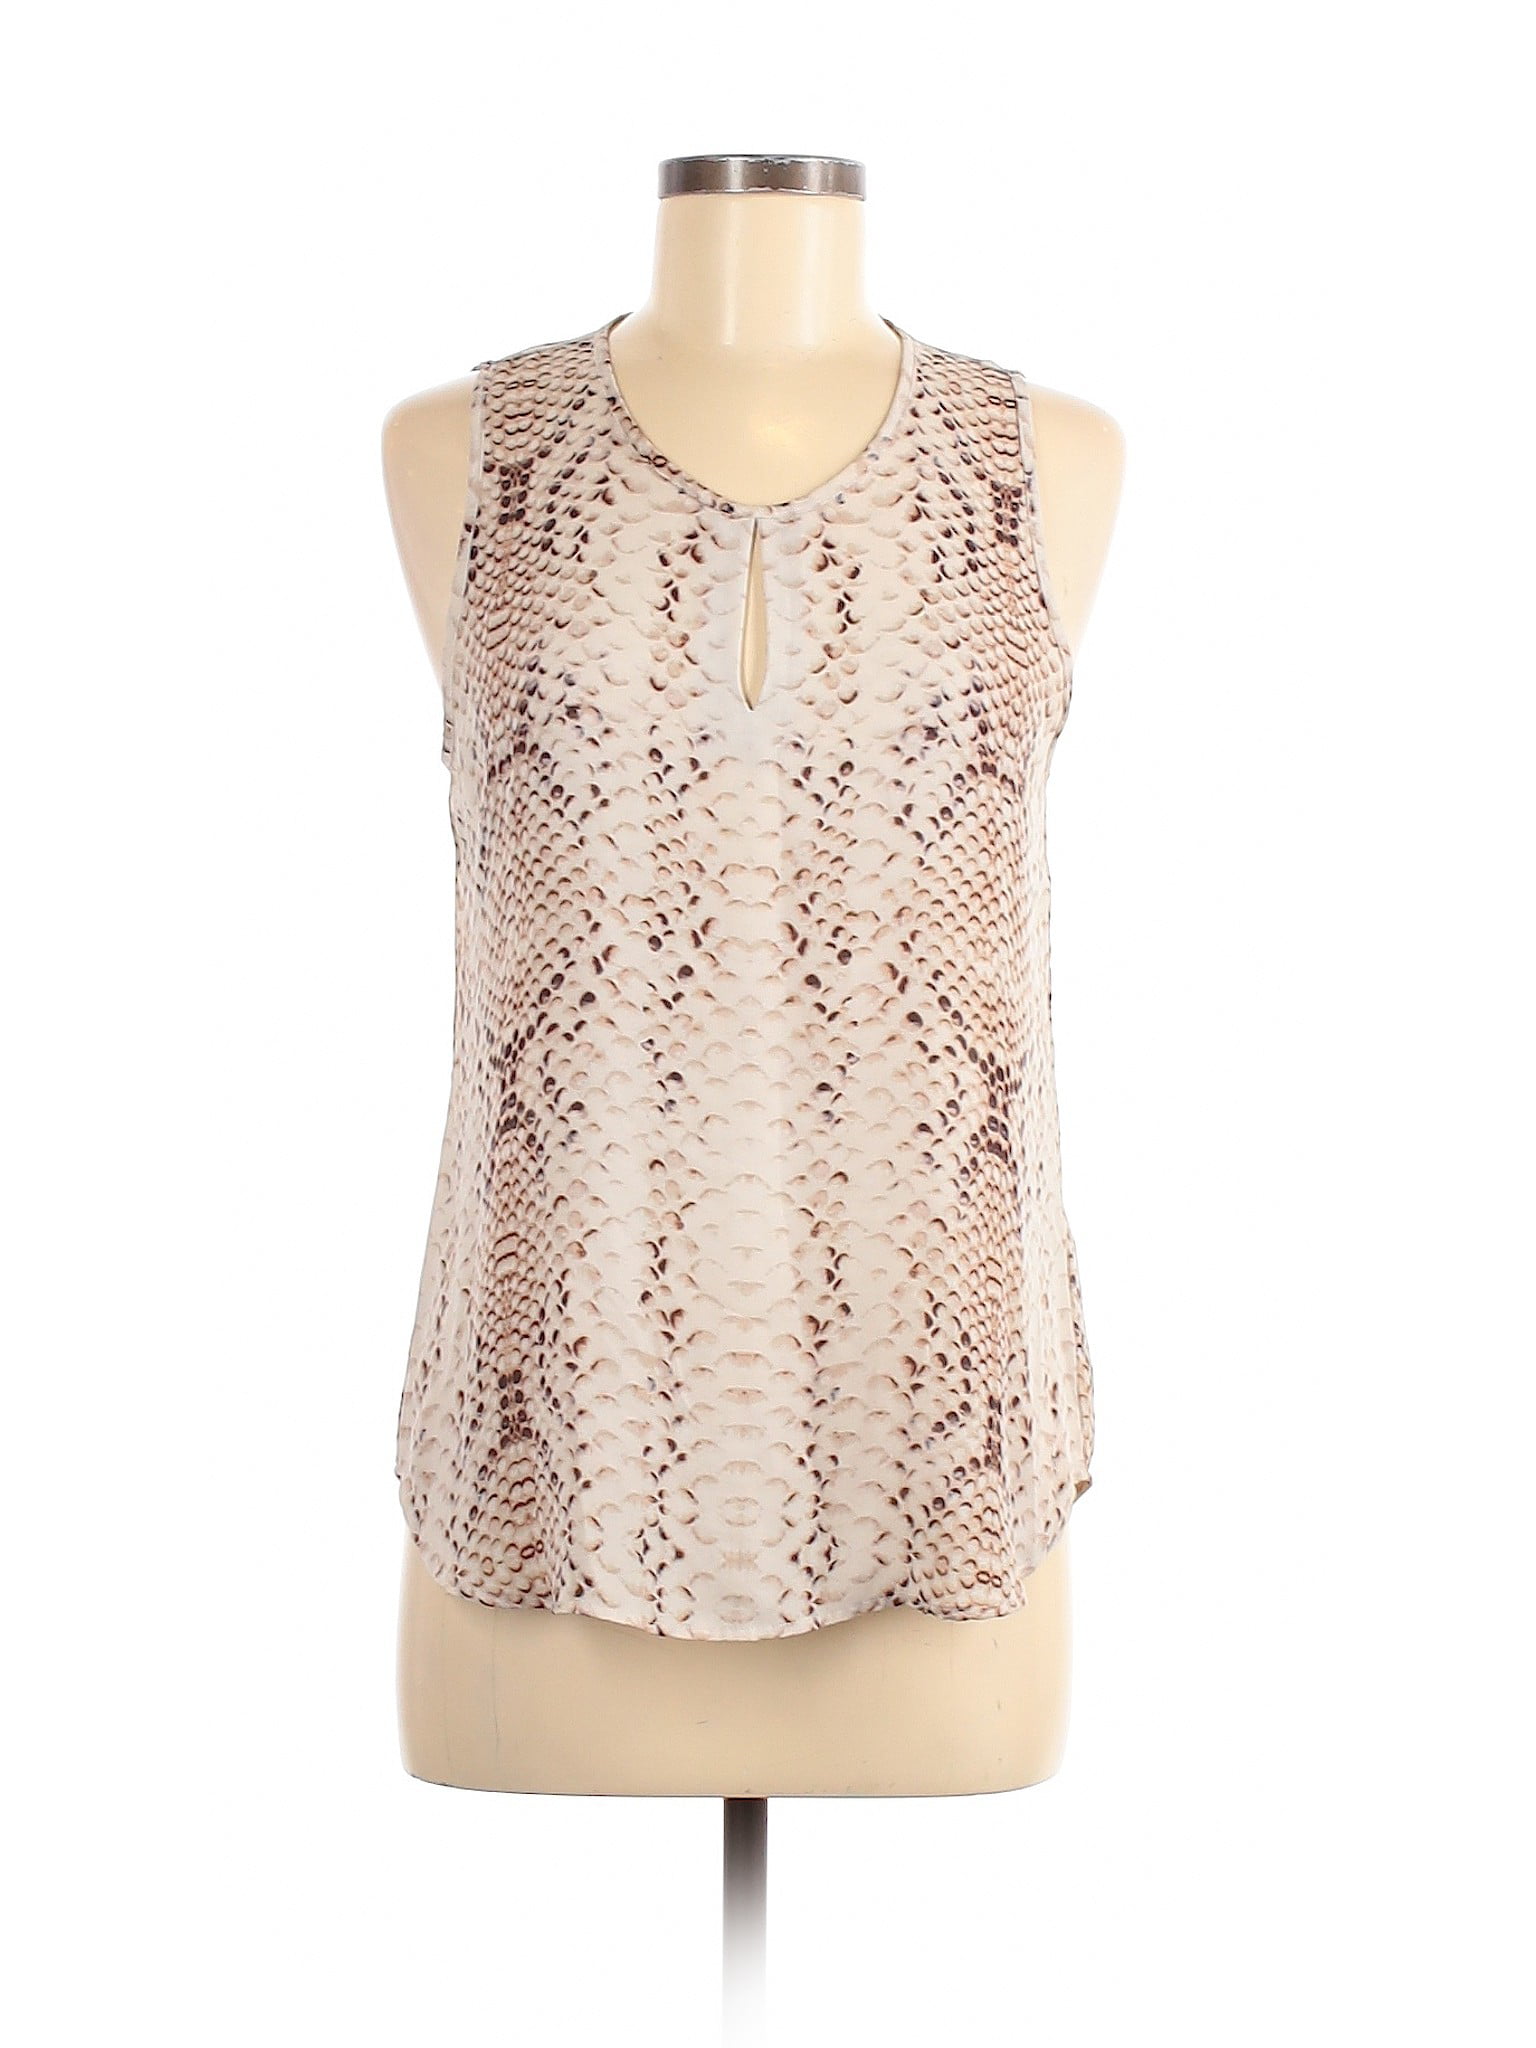 Violet+Claire - Pre-Owned Violet & Claire Women's Size M Sleeveless ...